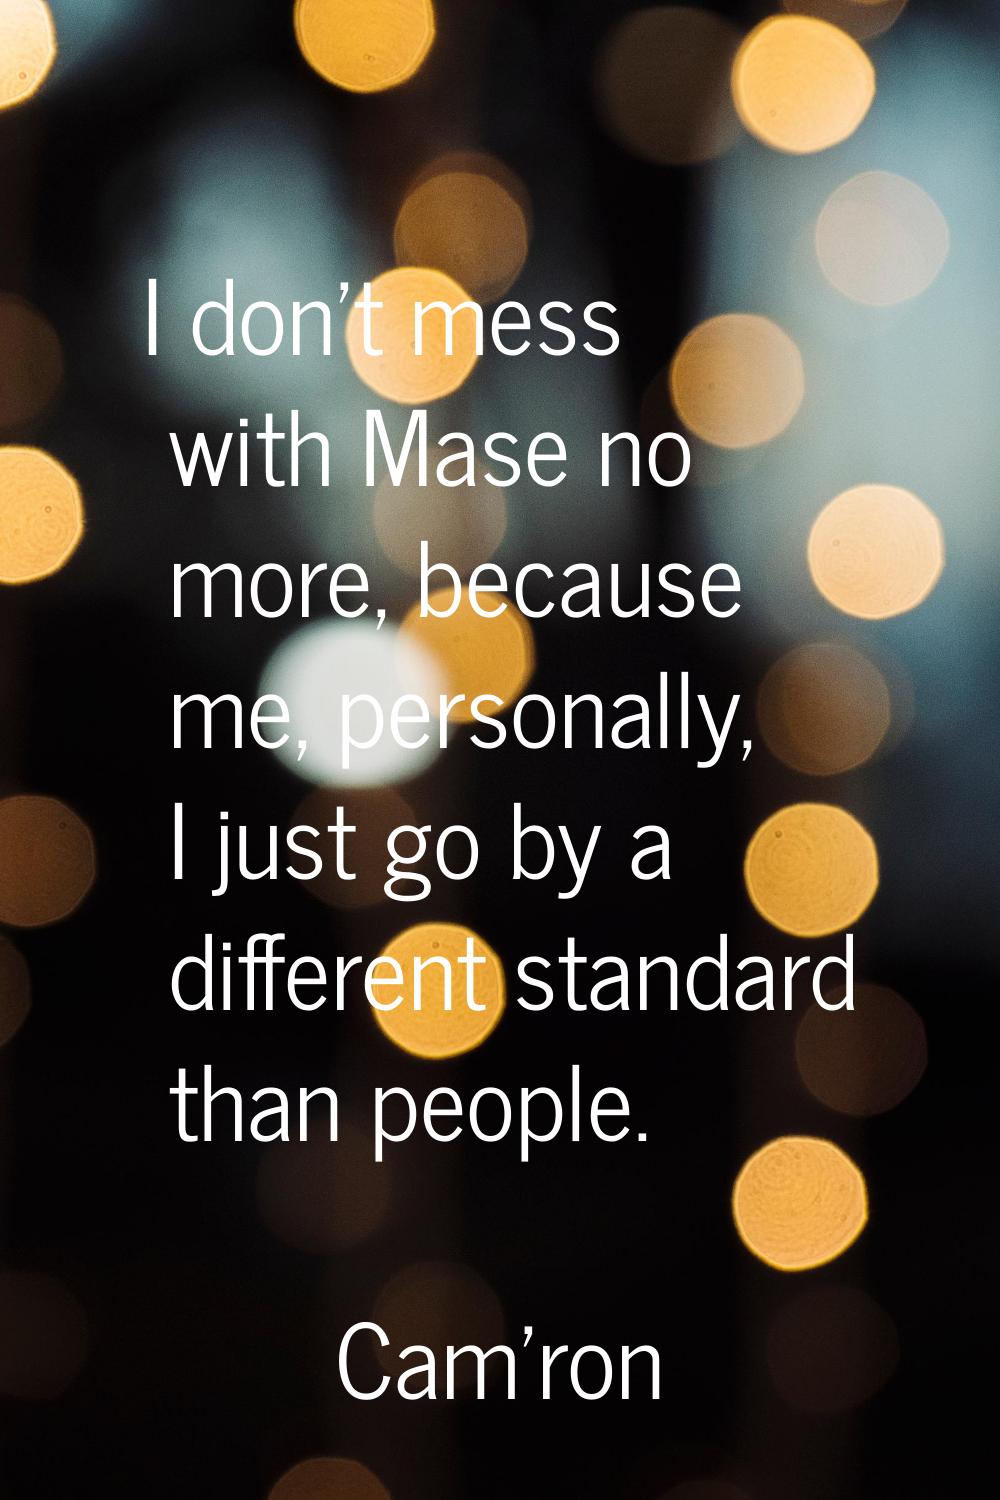 I don't mess with Mase no more, because me, personally, I just go by a different standard than peop